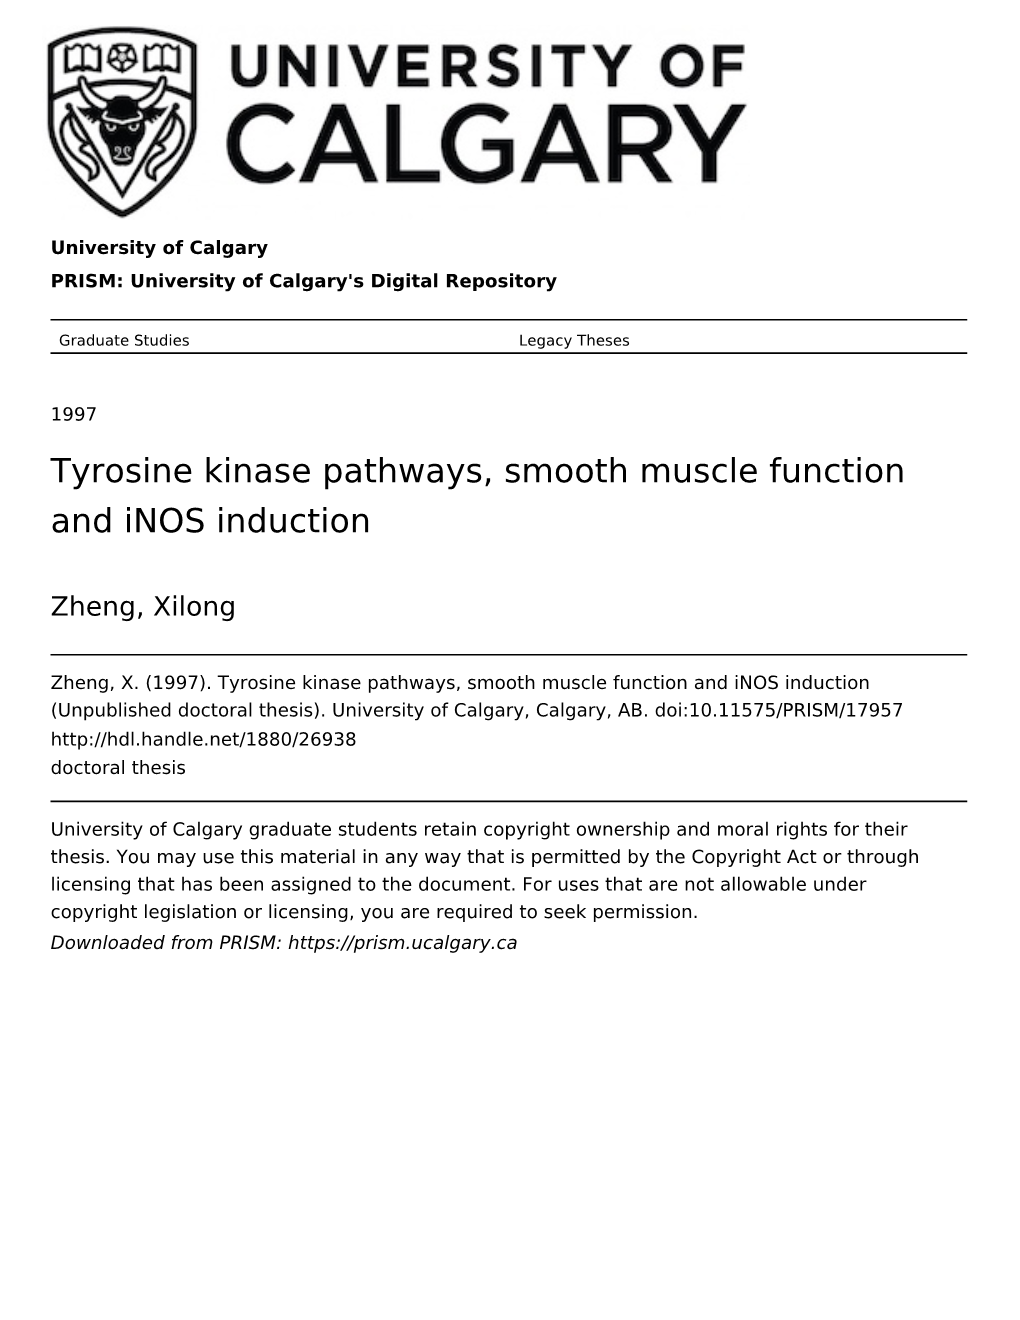 Tyrosine Kinase Pathways, Smooth Muscle Function and Inos Induction